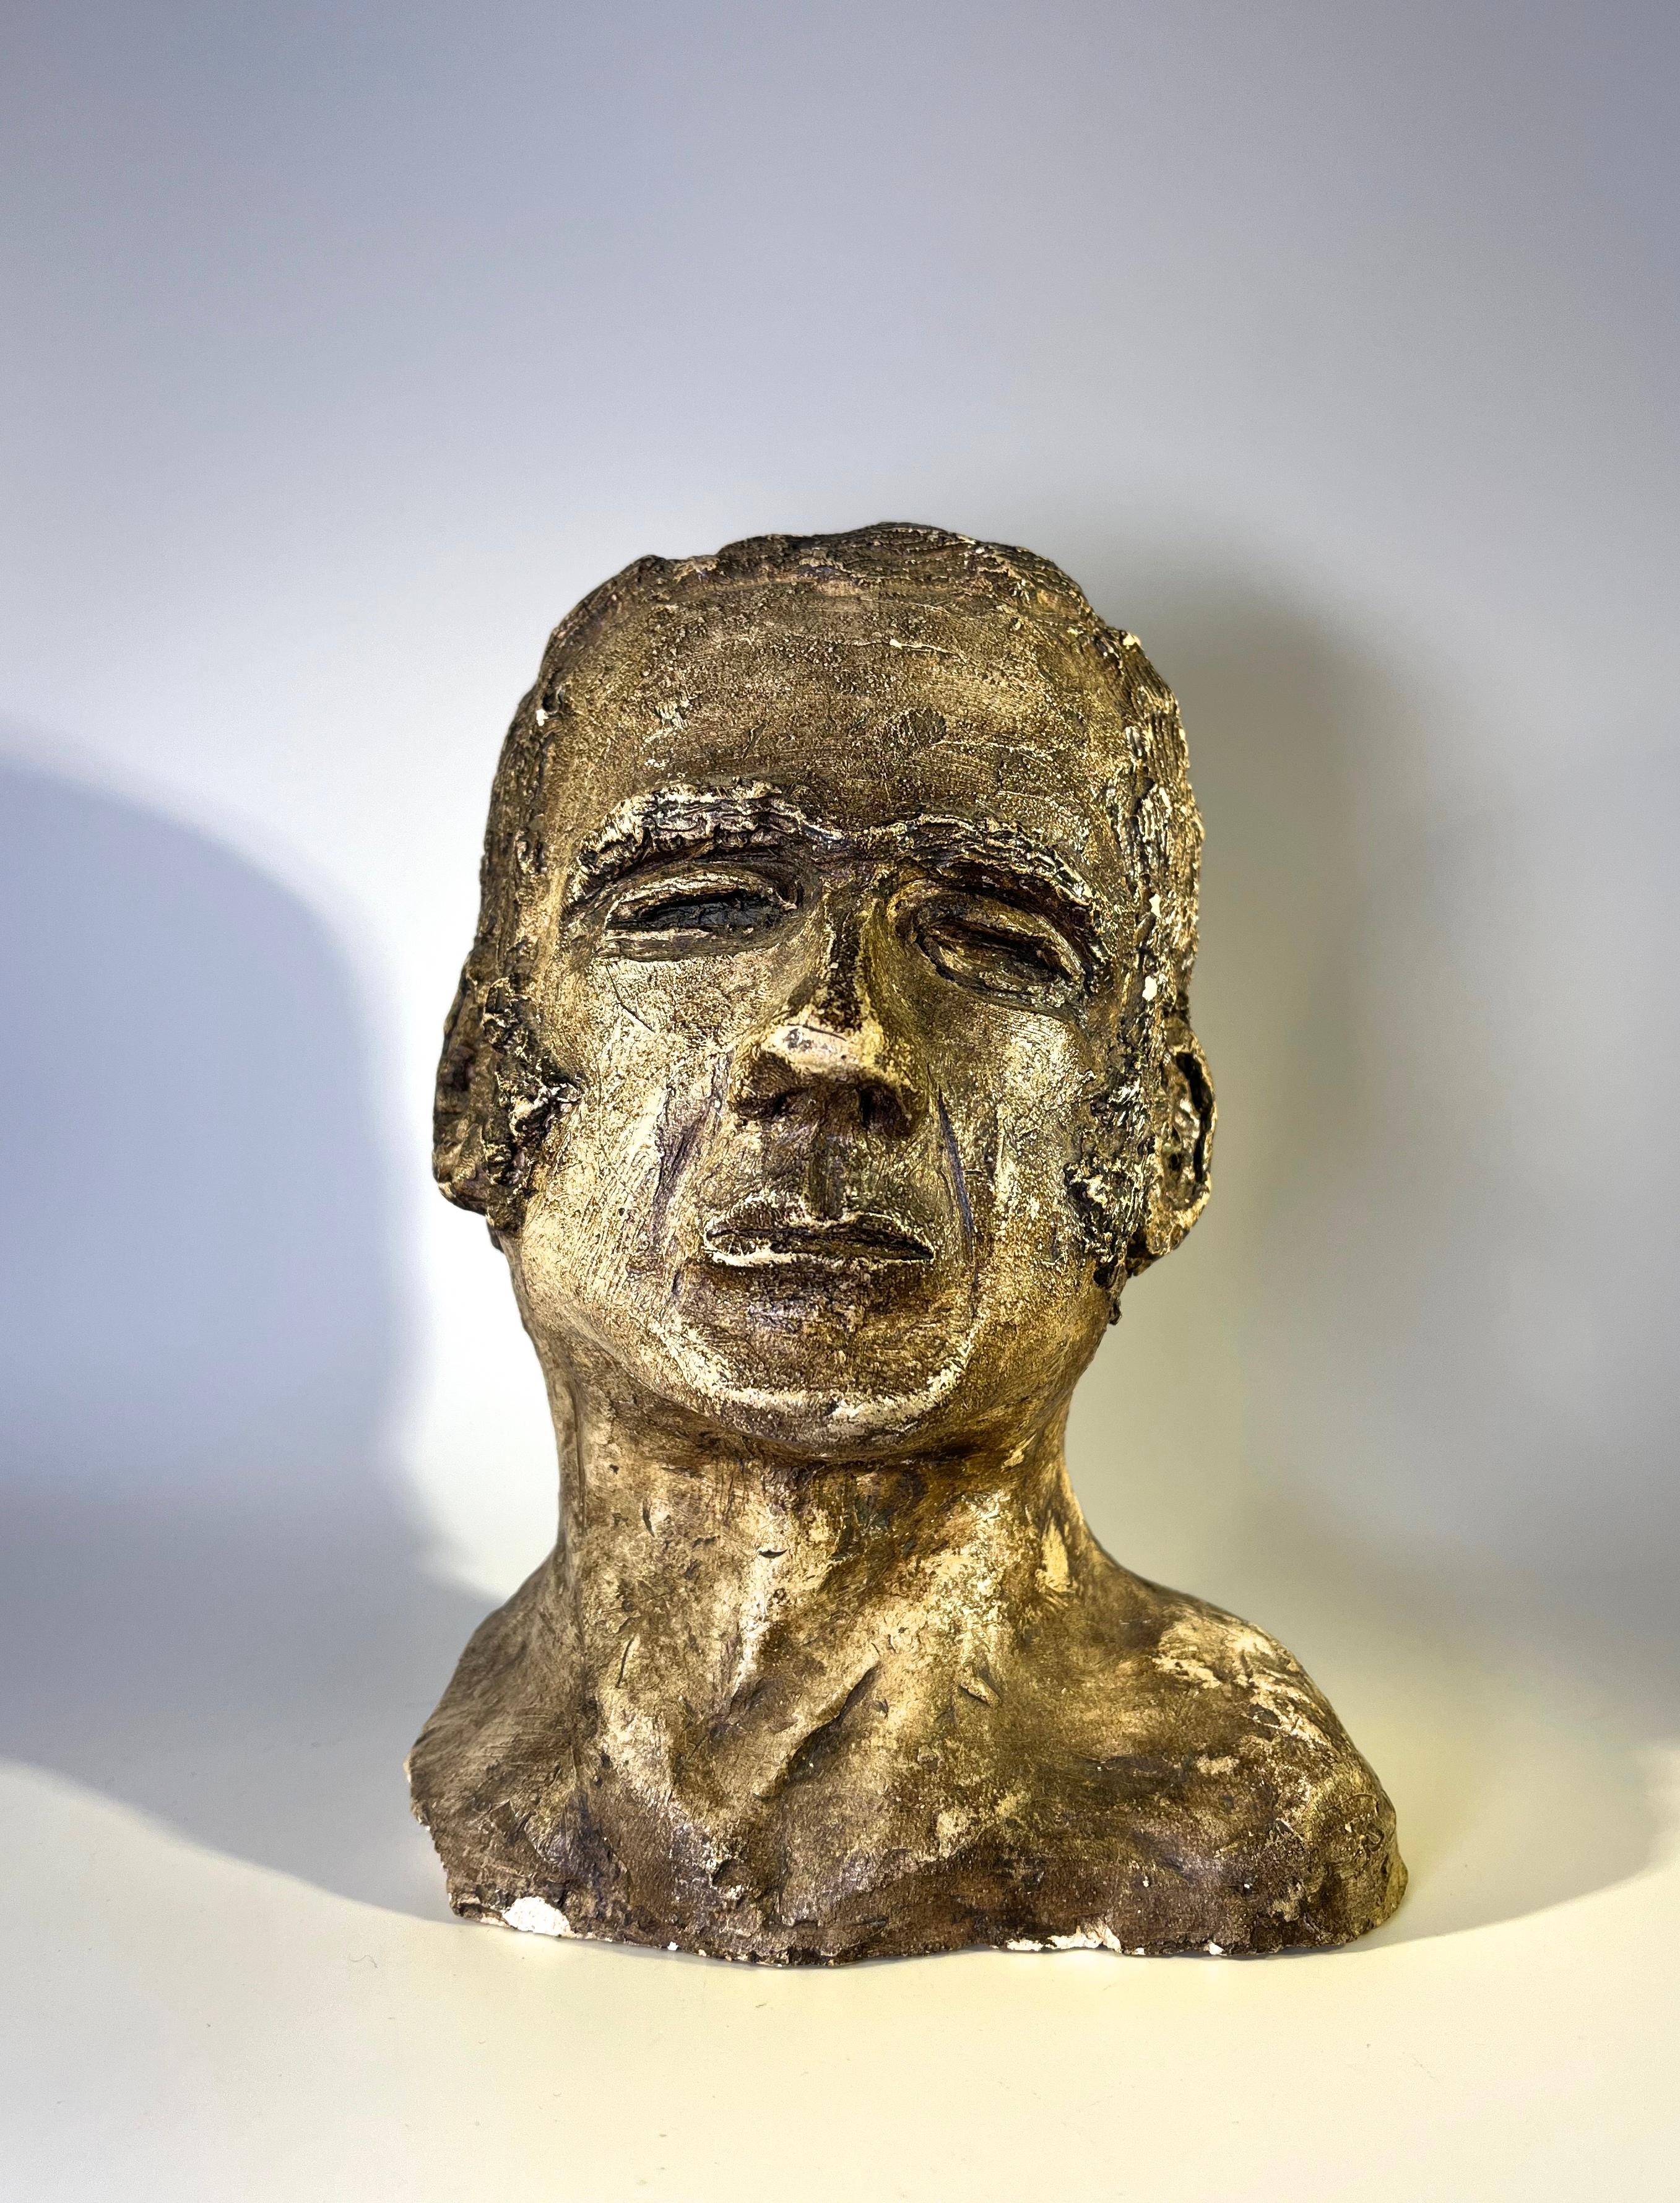 Mid 20th century hand sculpted clay bust of a Peruvian male
The intense expression and rough texture accentuate the machismo of this piece
A portion of one shoulder is missing, however, this in no way detracts from the potency of this wonderful